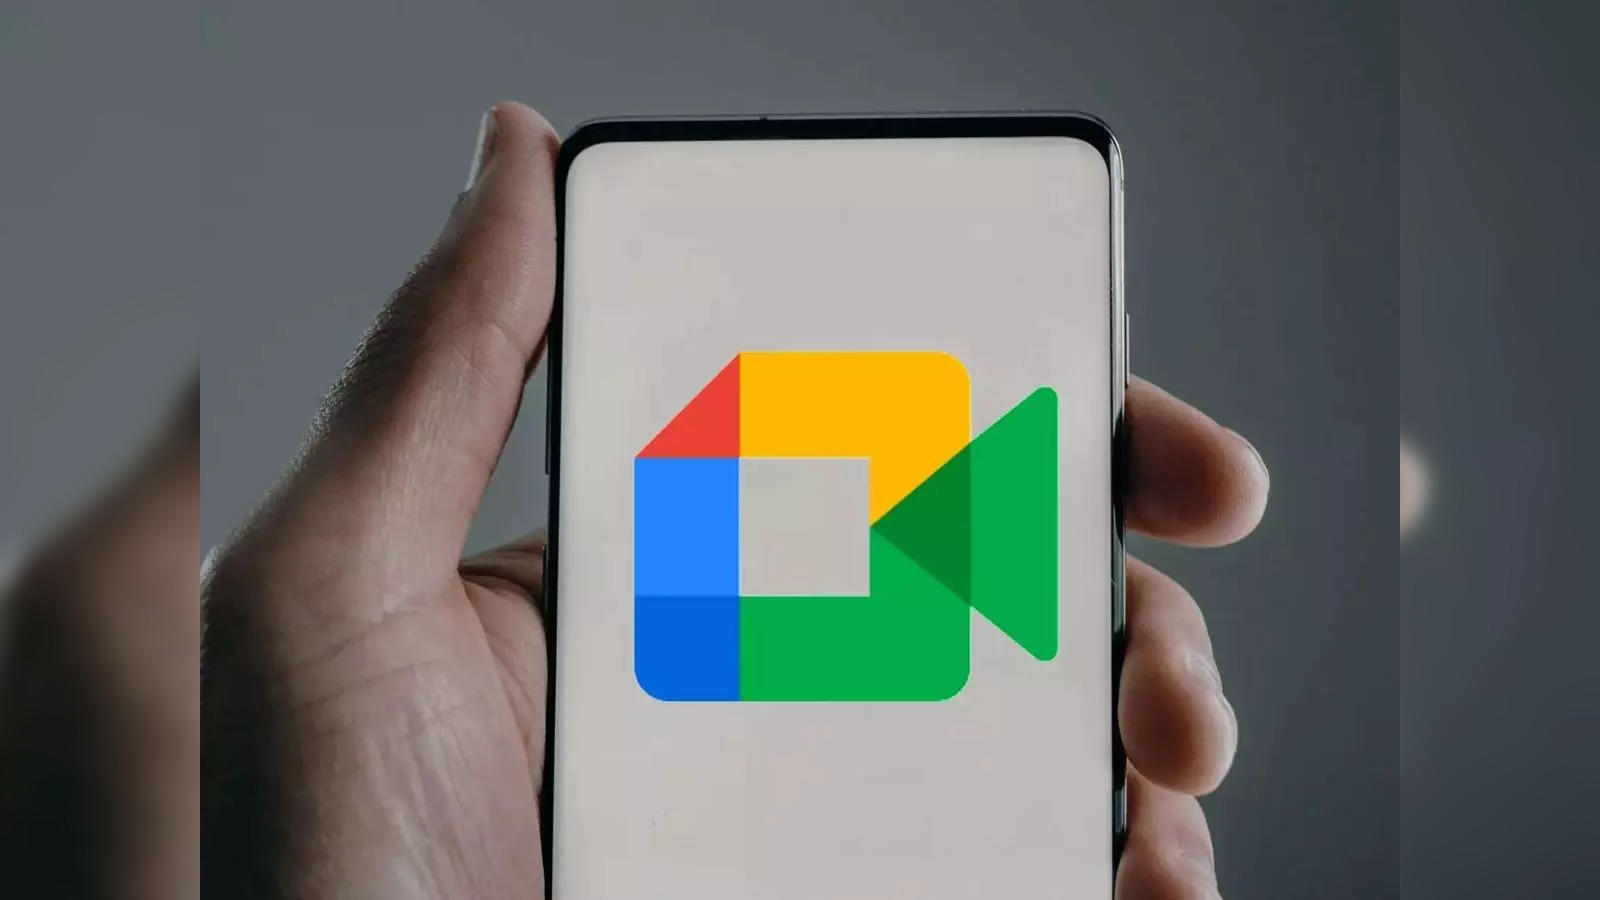 Google brings new features to Meet's picture-in-picture mode in